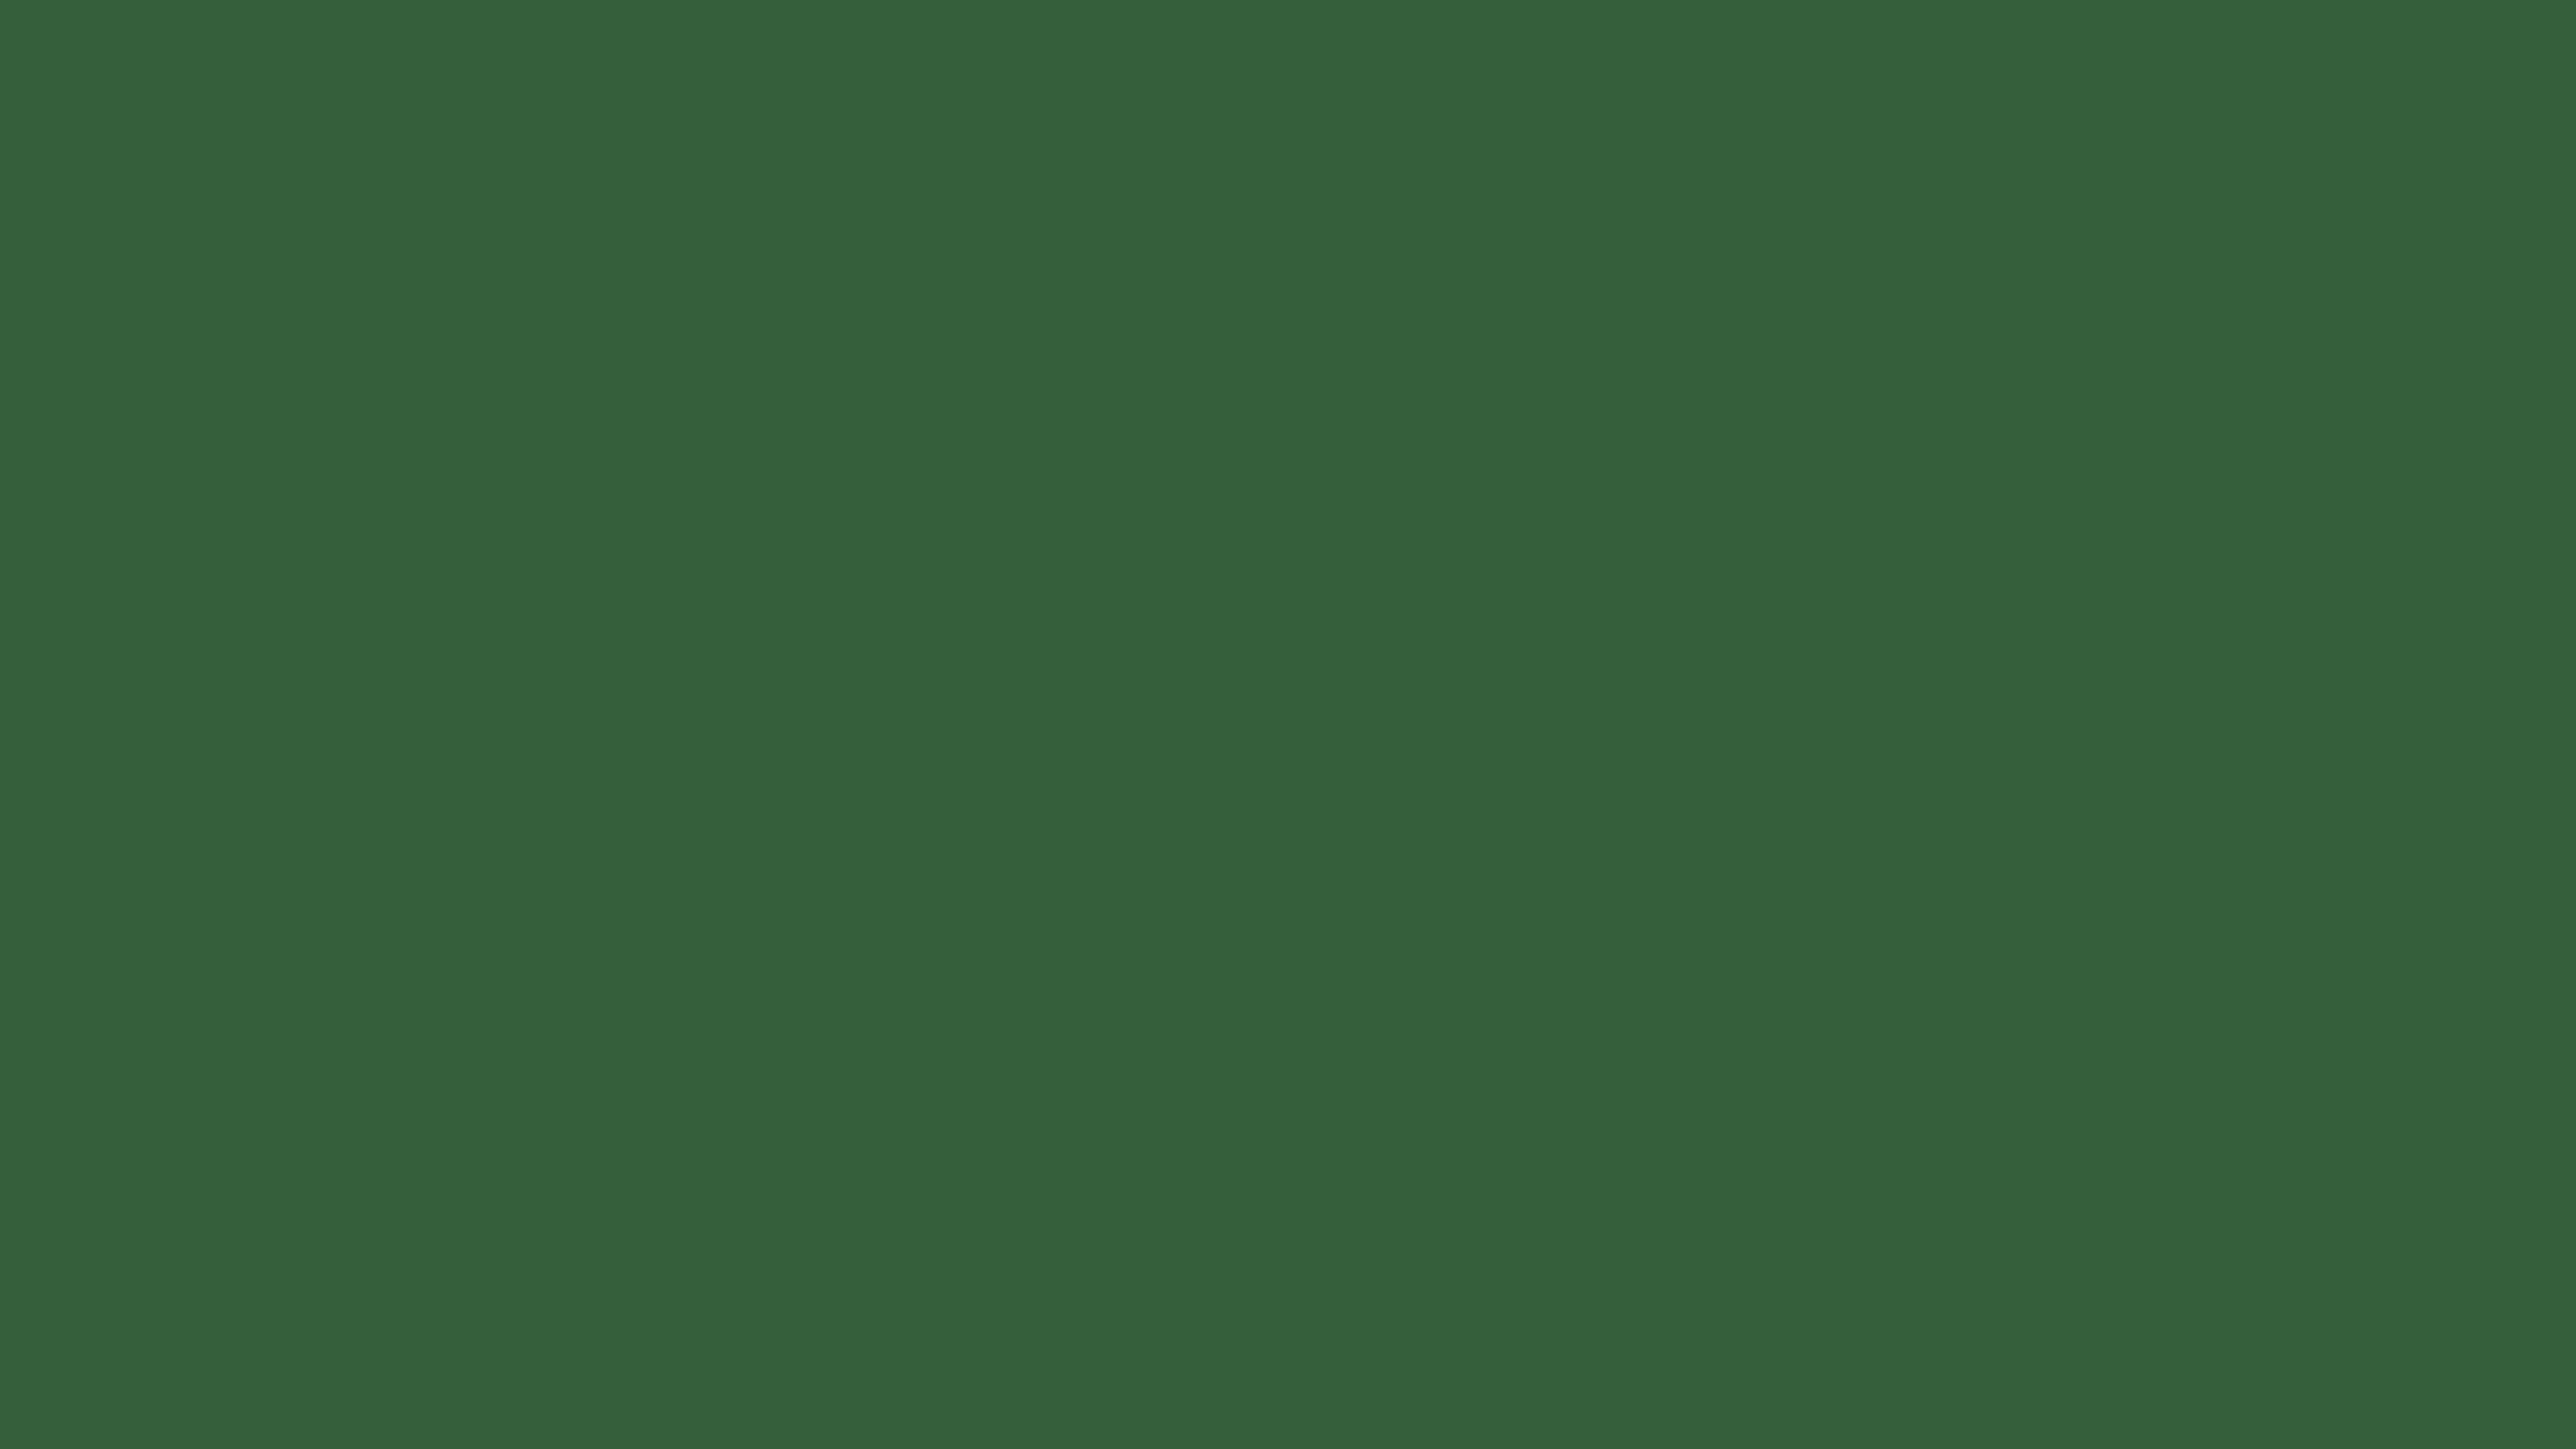 3840x2160 Deep Moss Green Solid Color Background